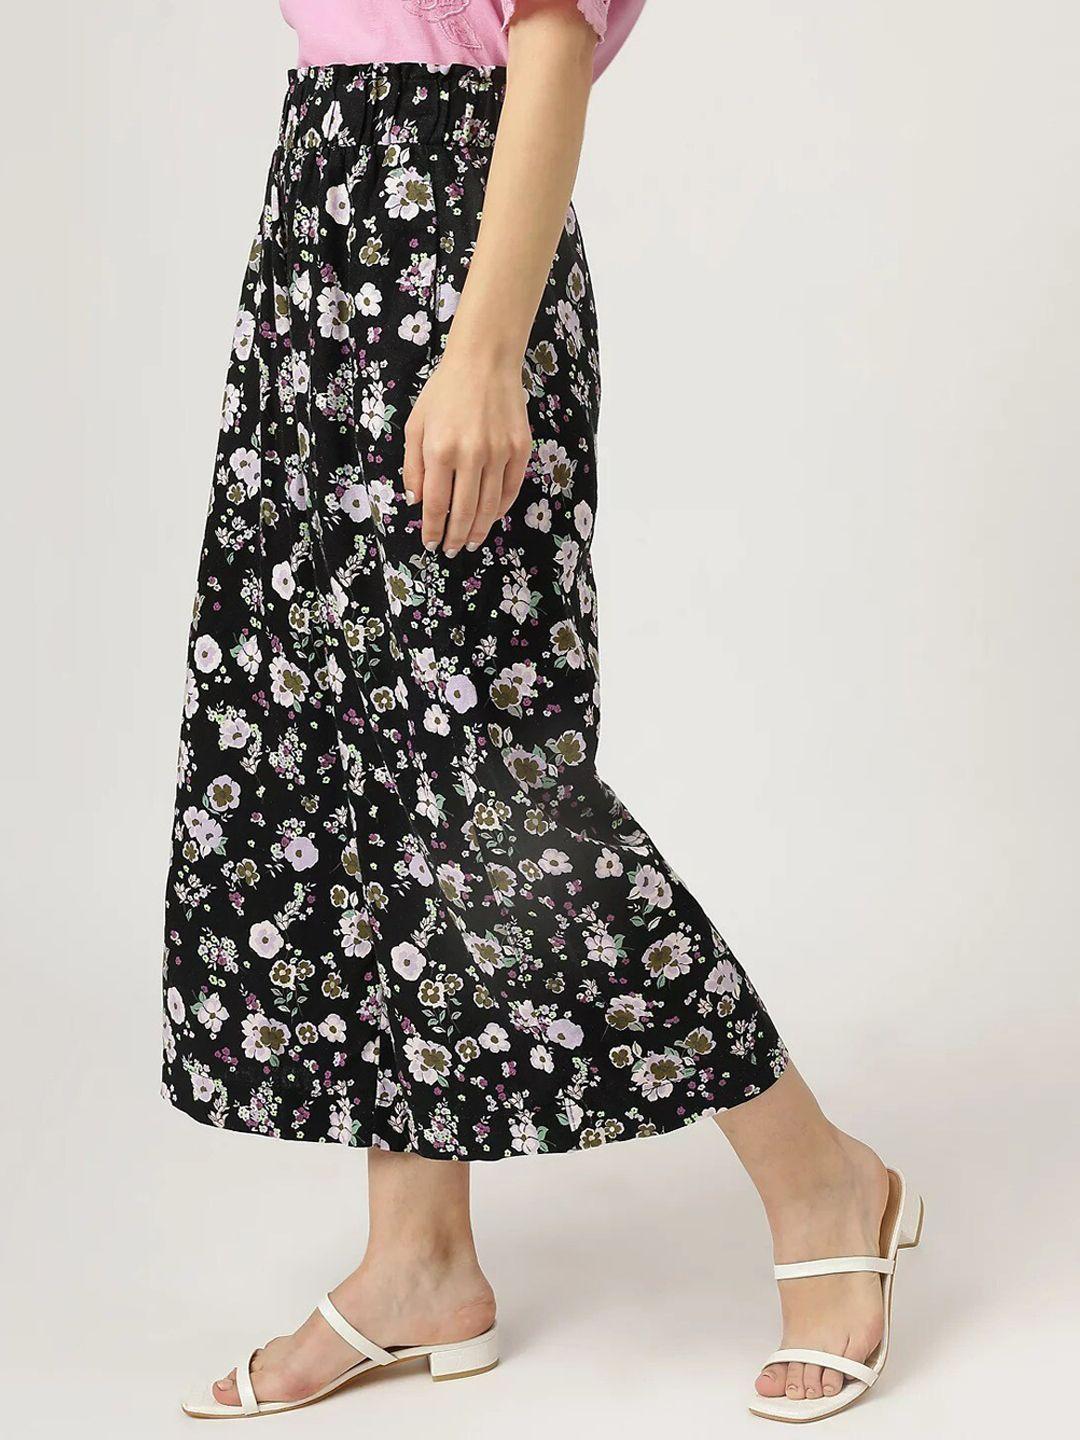 marks & spencer women black floral printed high-rise trousers